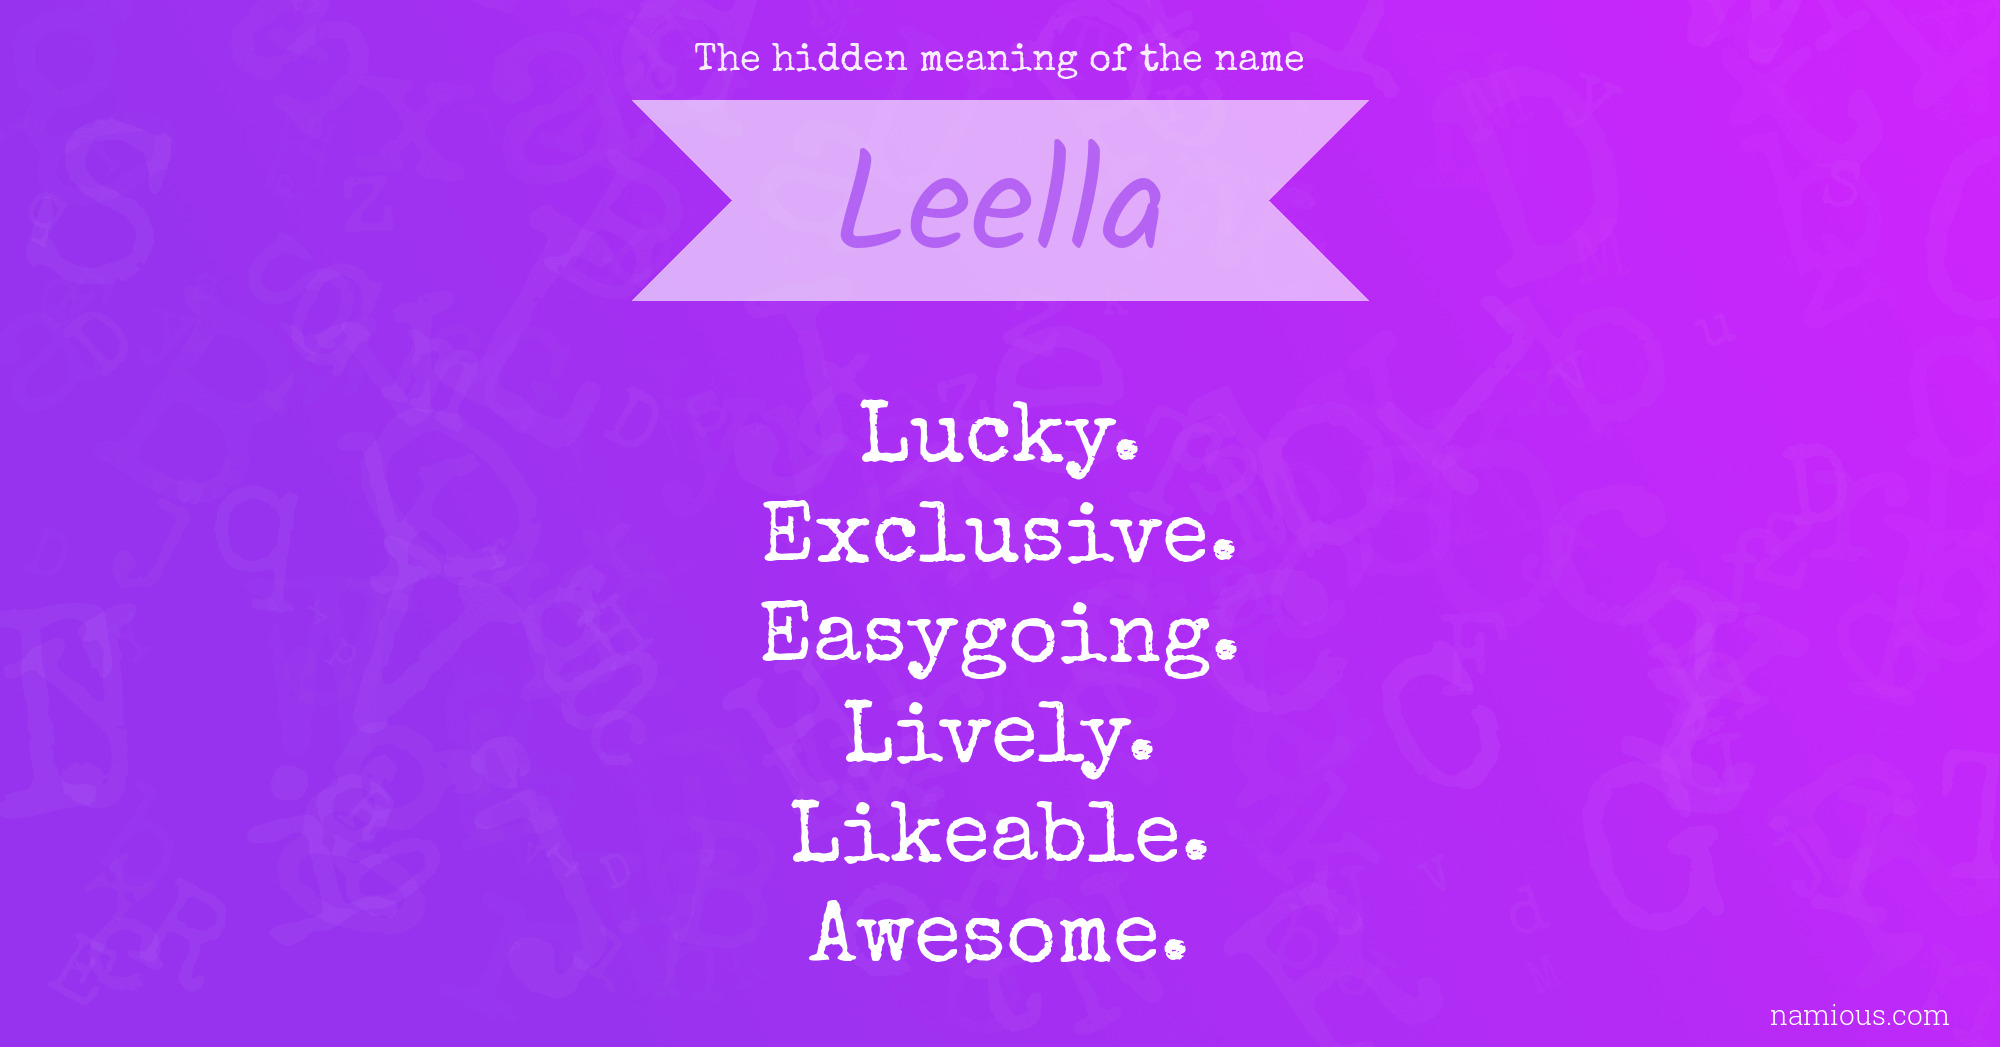 The hidden meaning of the name Leella